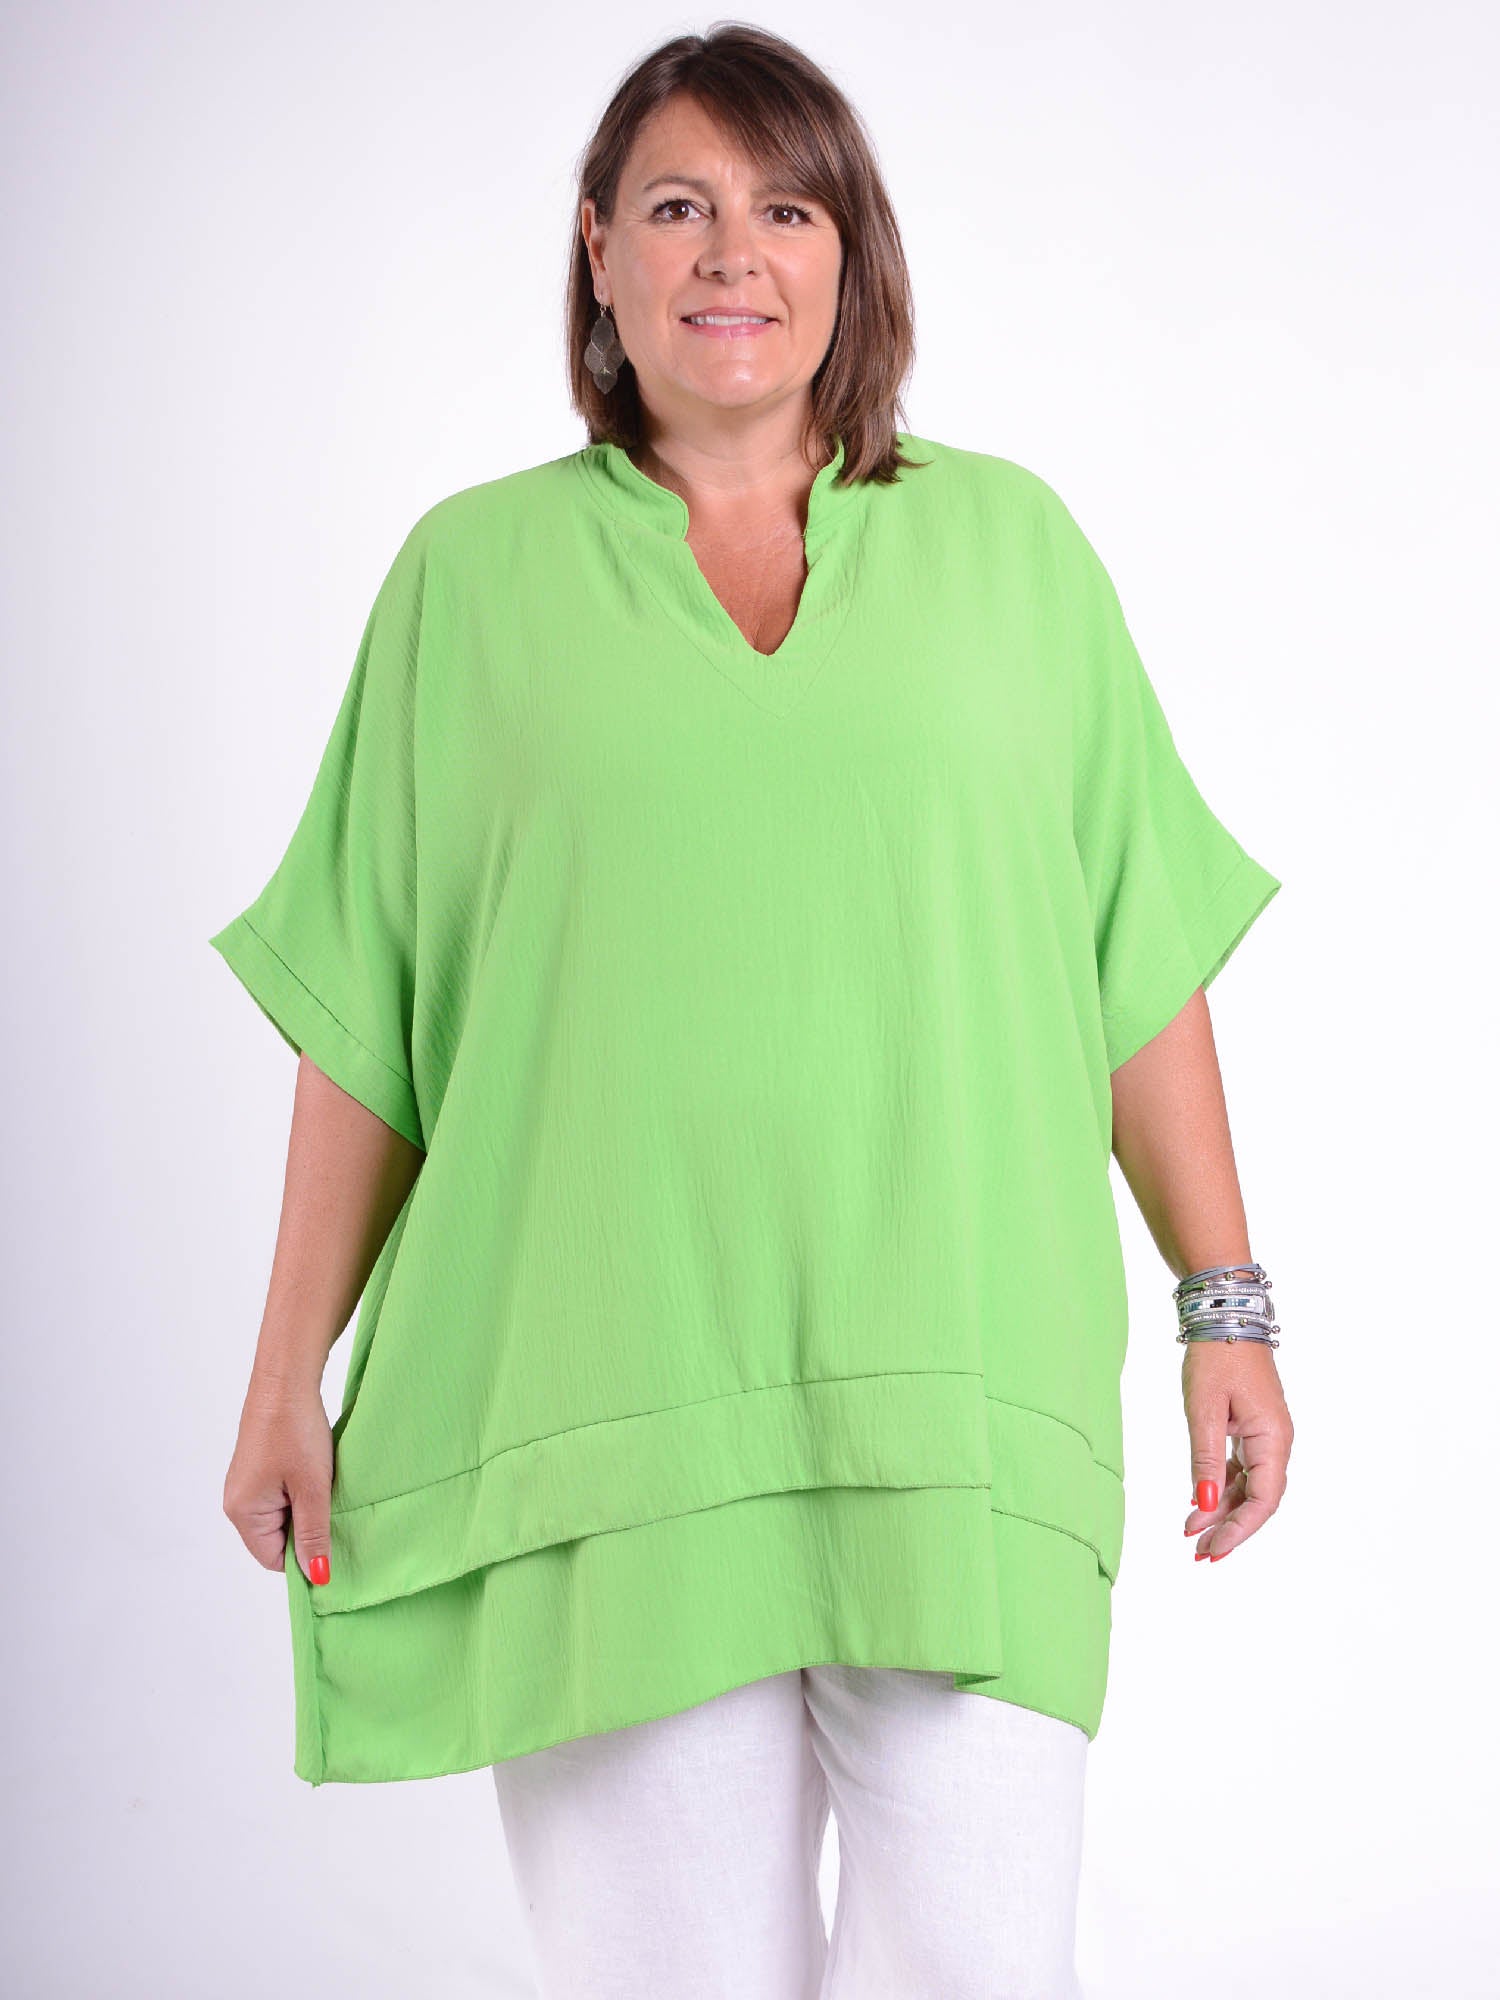 Pure Plus Oversized Lagenlook Tunic with pockets - TP1005, Tunic, Pure Plus Clothing, Lagenlook Clothing, Plus Size Fashion, Over 50 Fashion